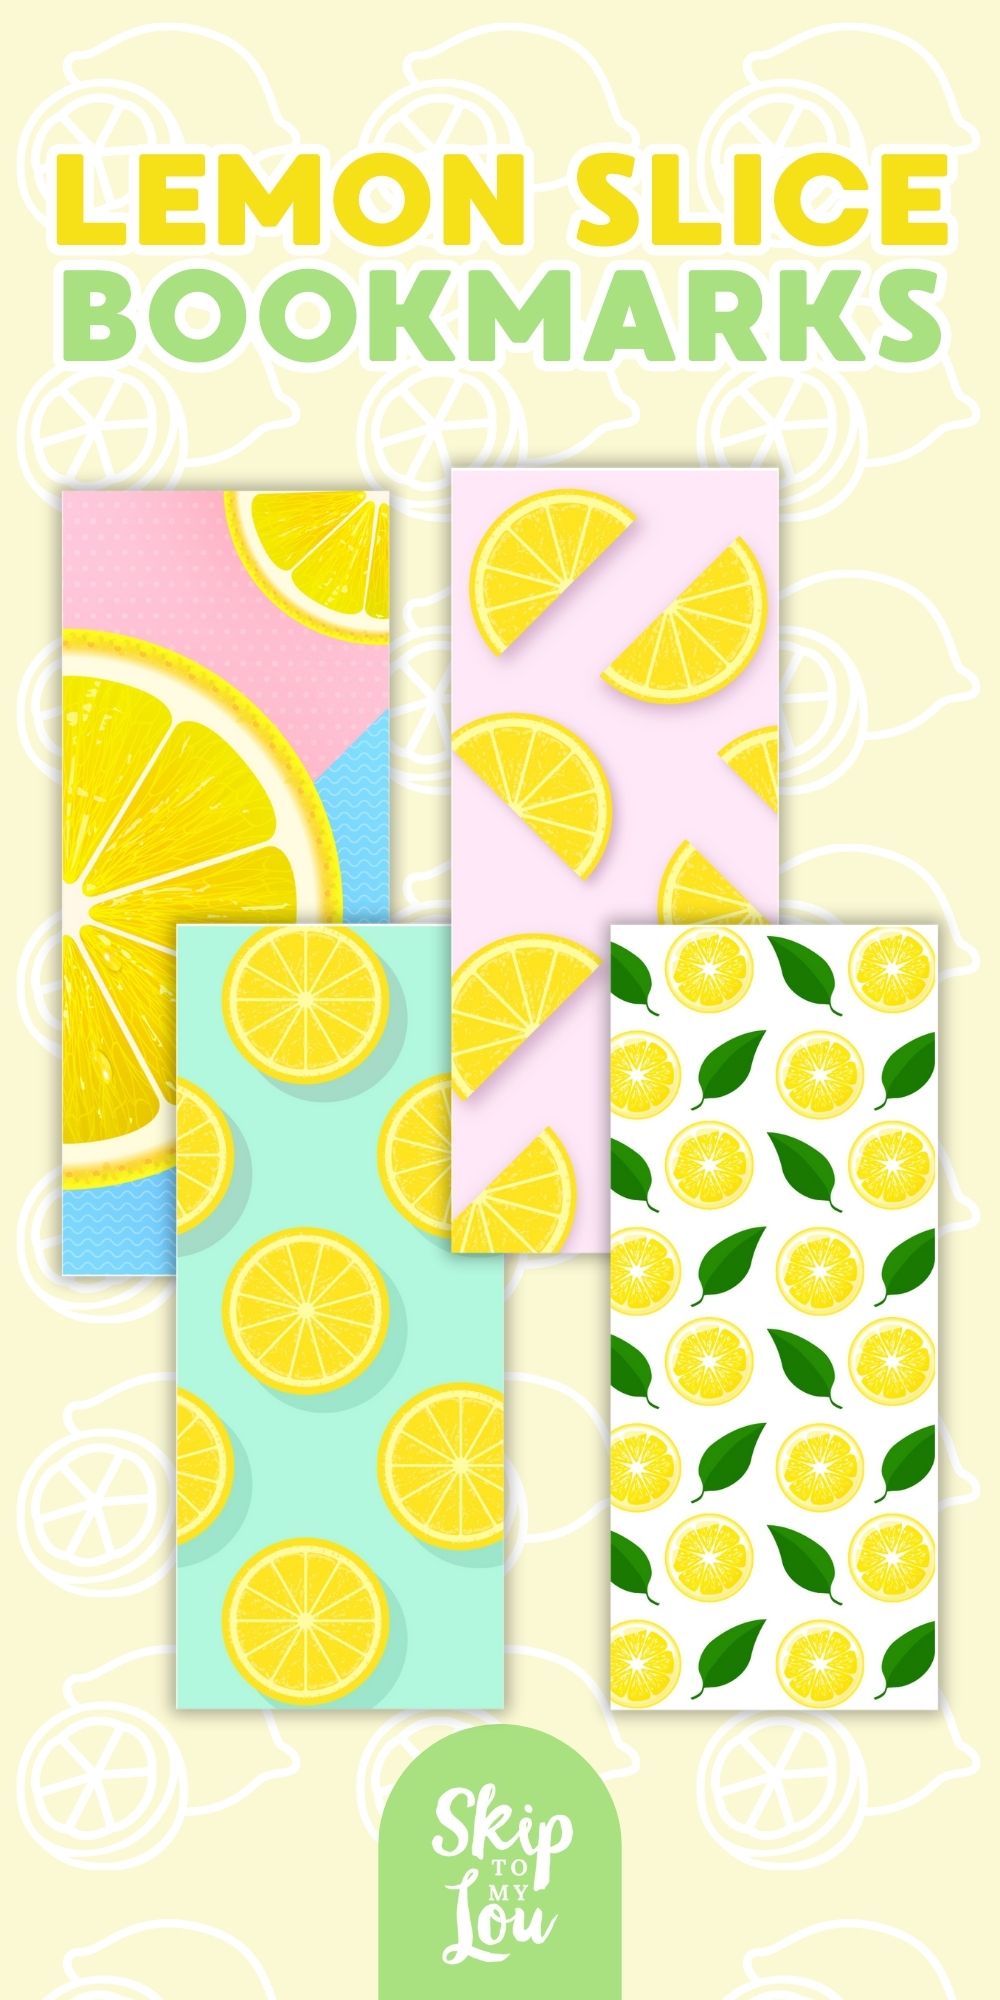 Four rectangle shaped bookmarks showing sliced lemon sections, by Skip to my Lou.